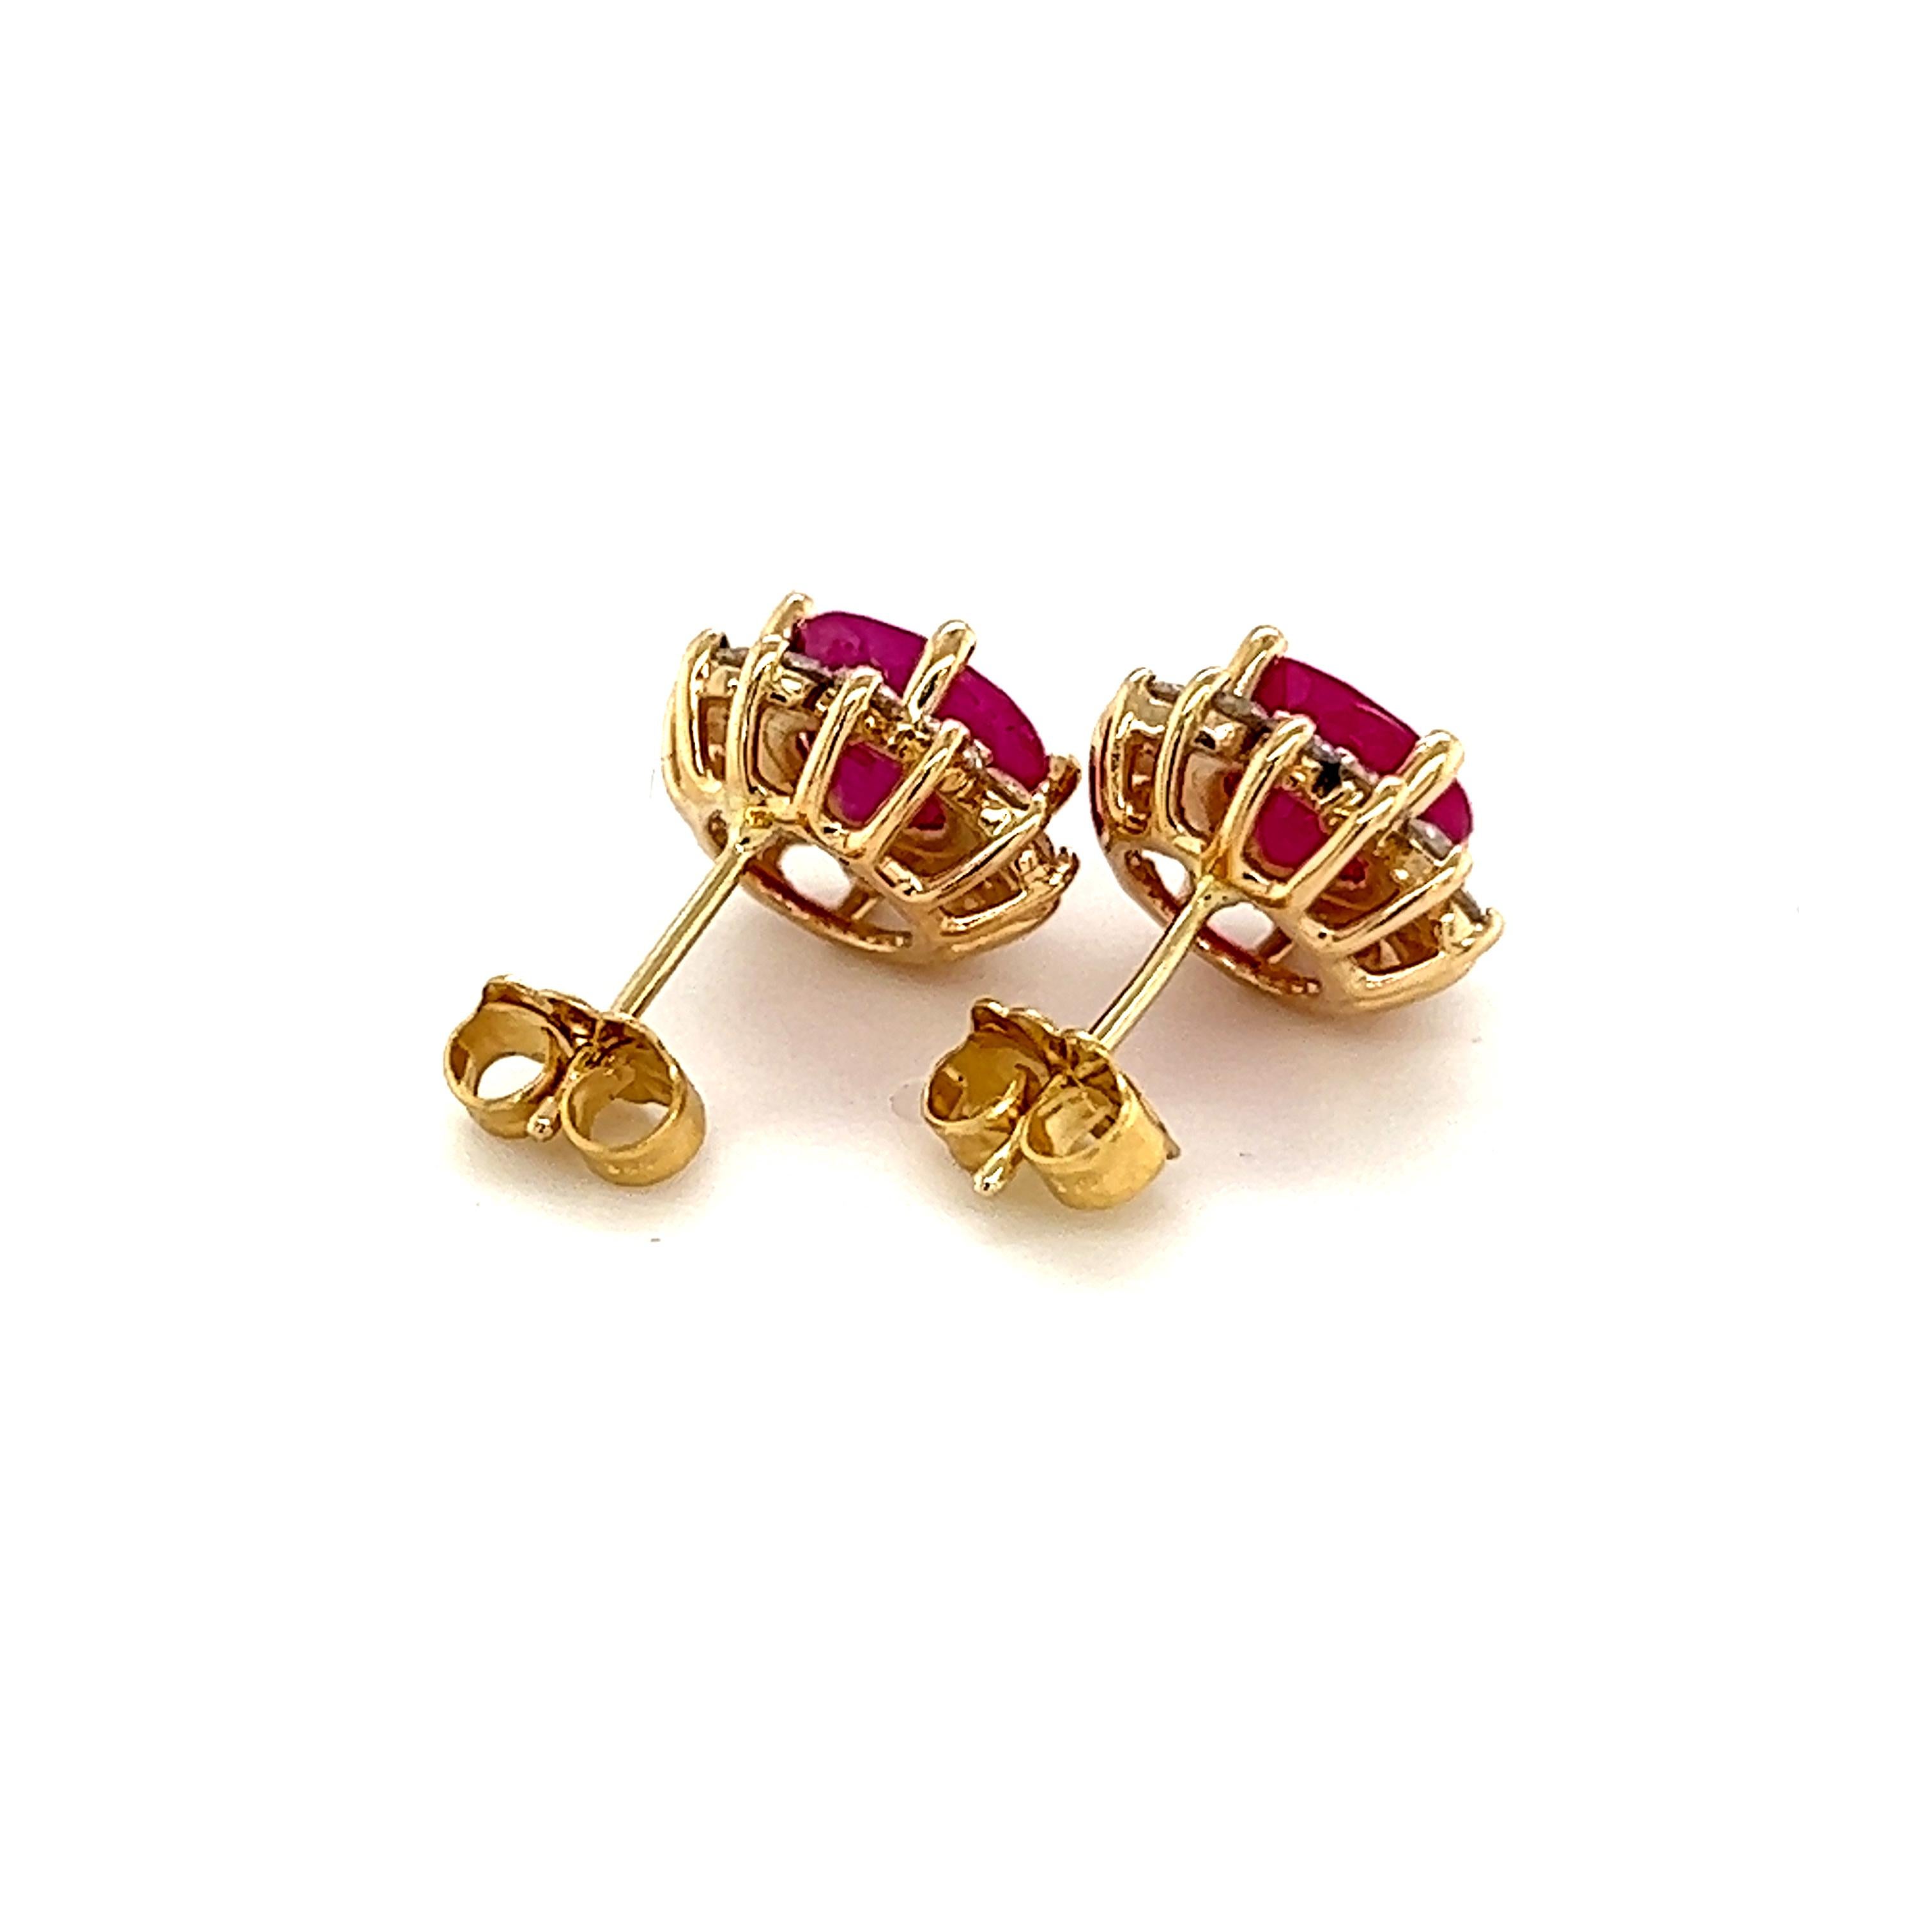 Natural Ruby Diamond Earrings 14k Gold 3.72 TCW Certified For Sale 3